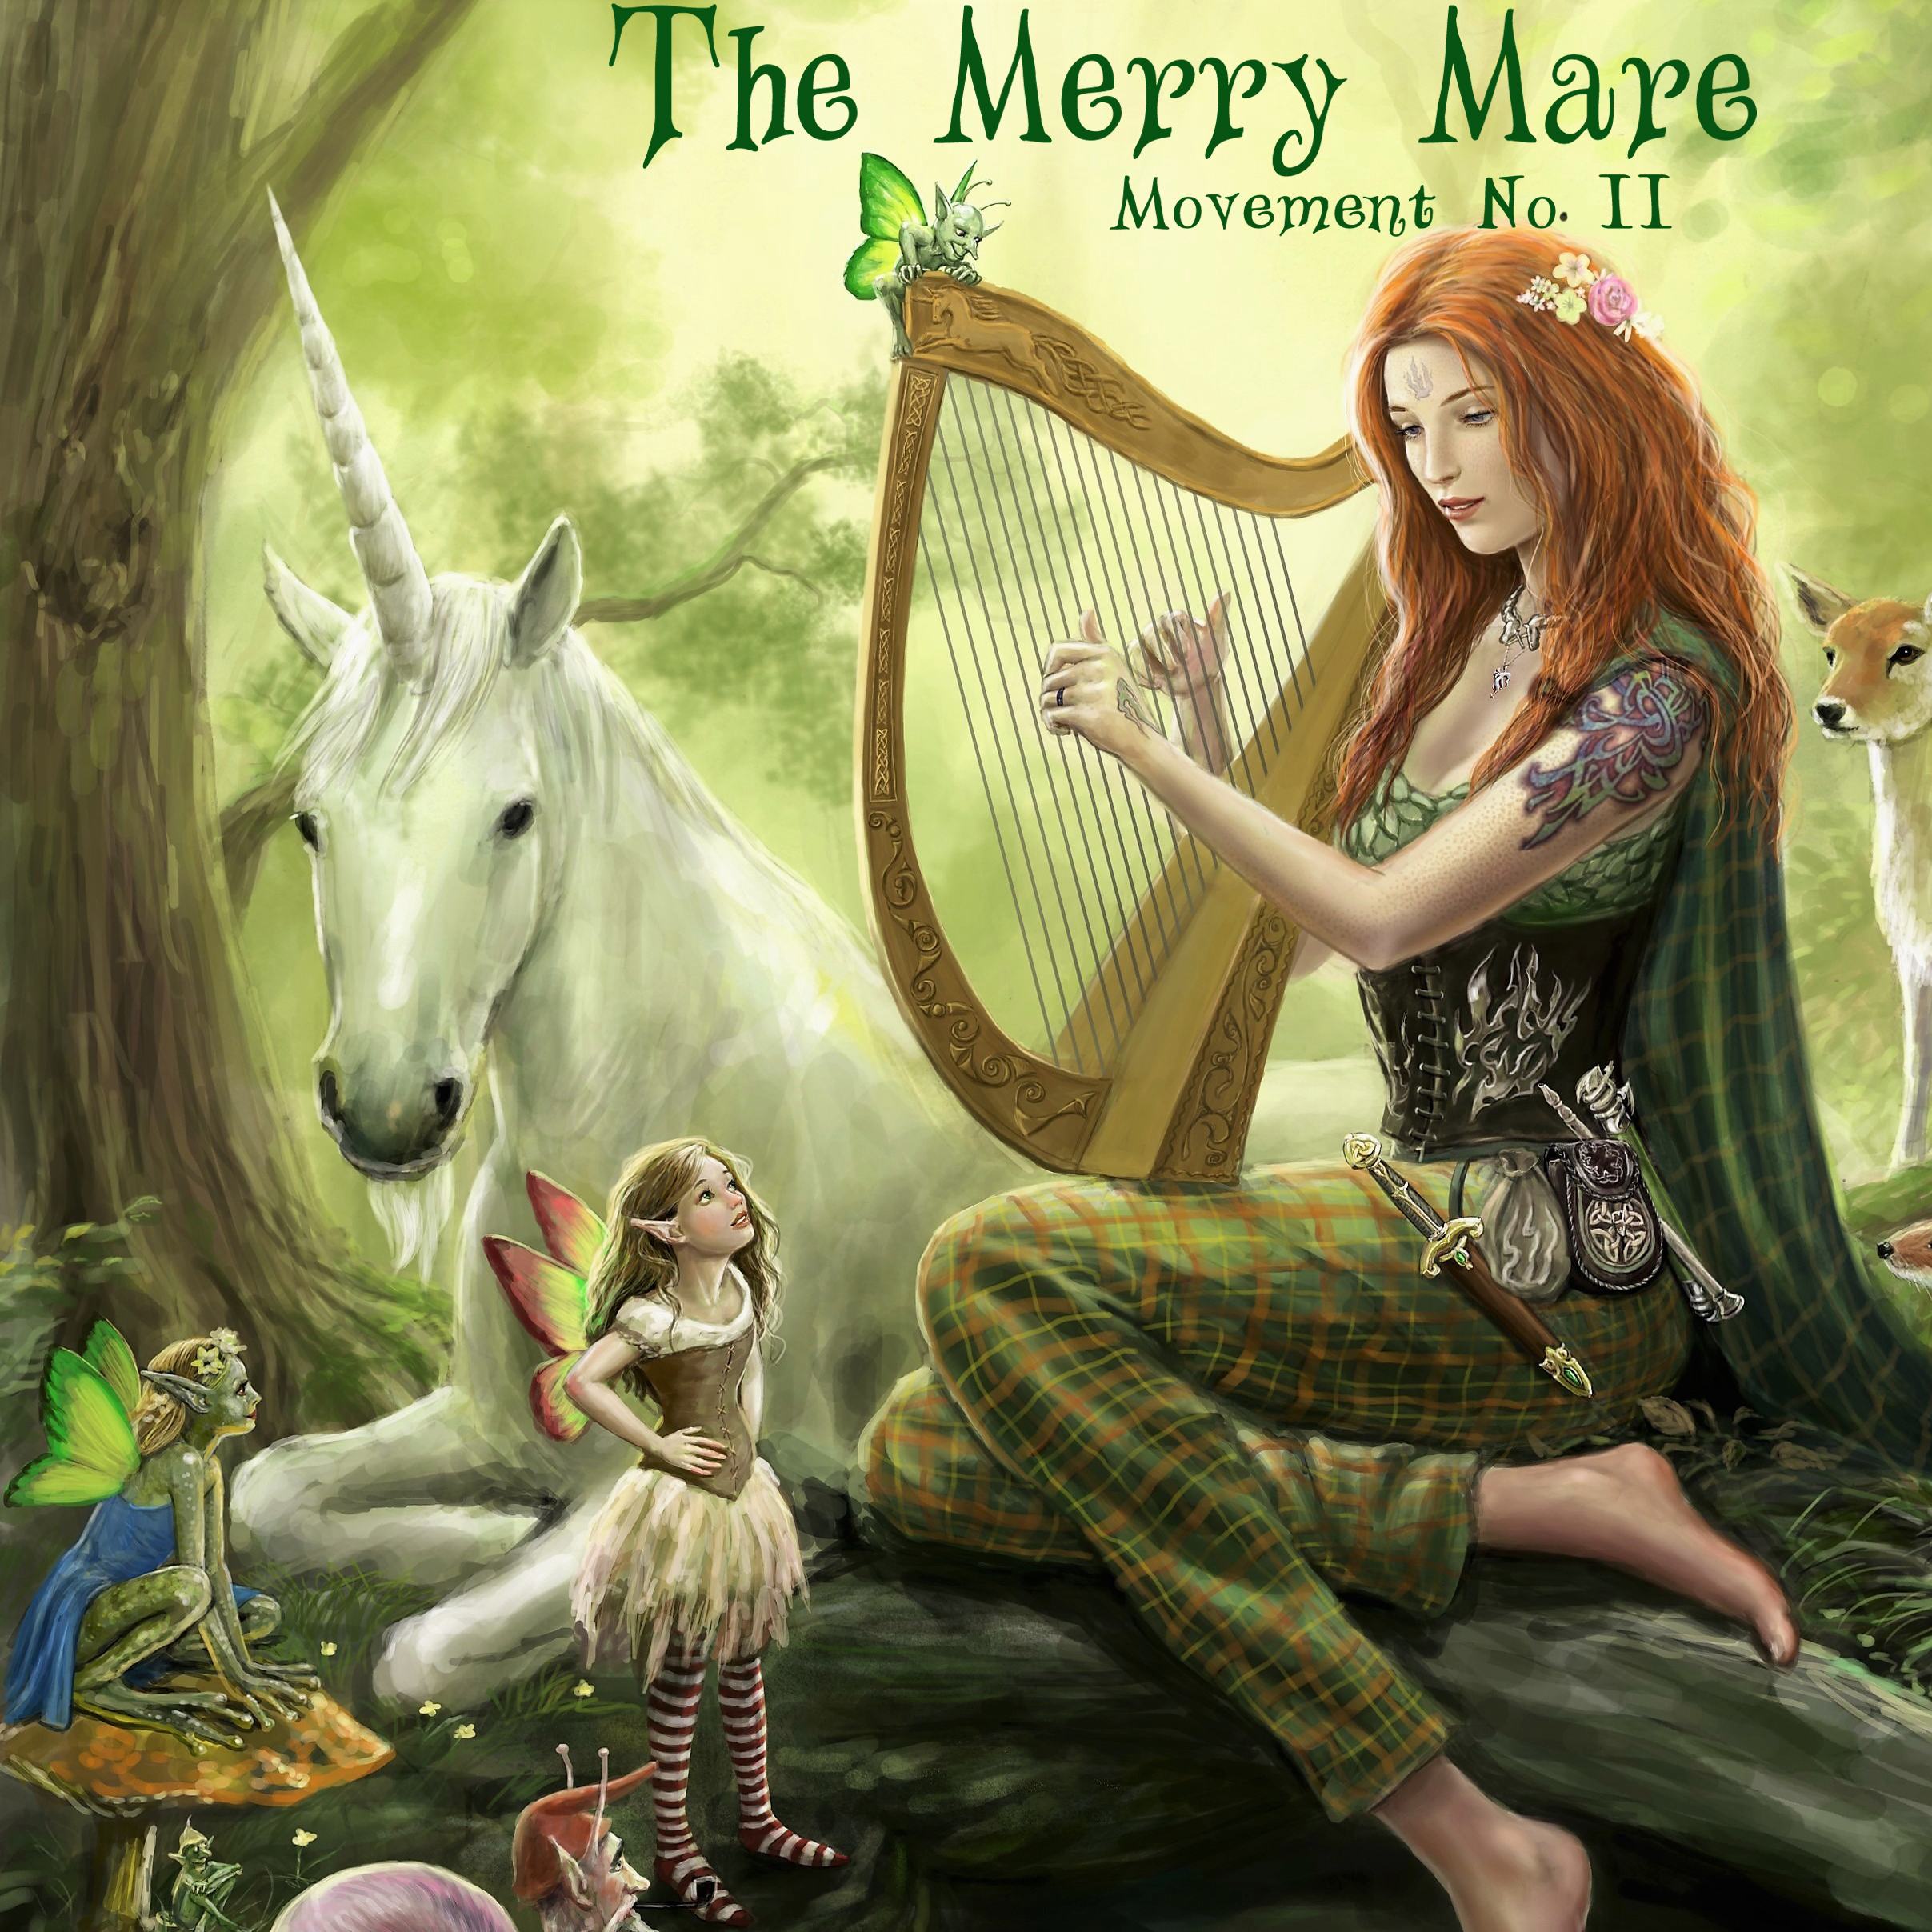 The Merry Mare